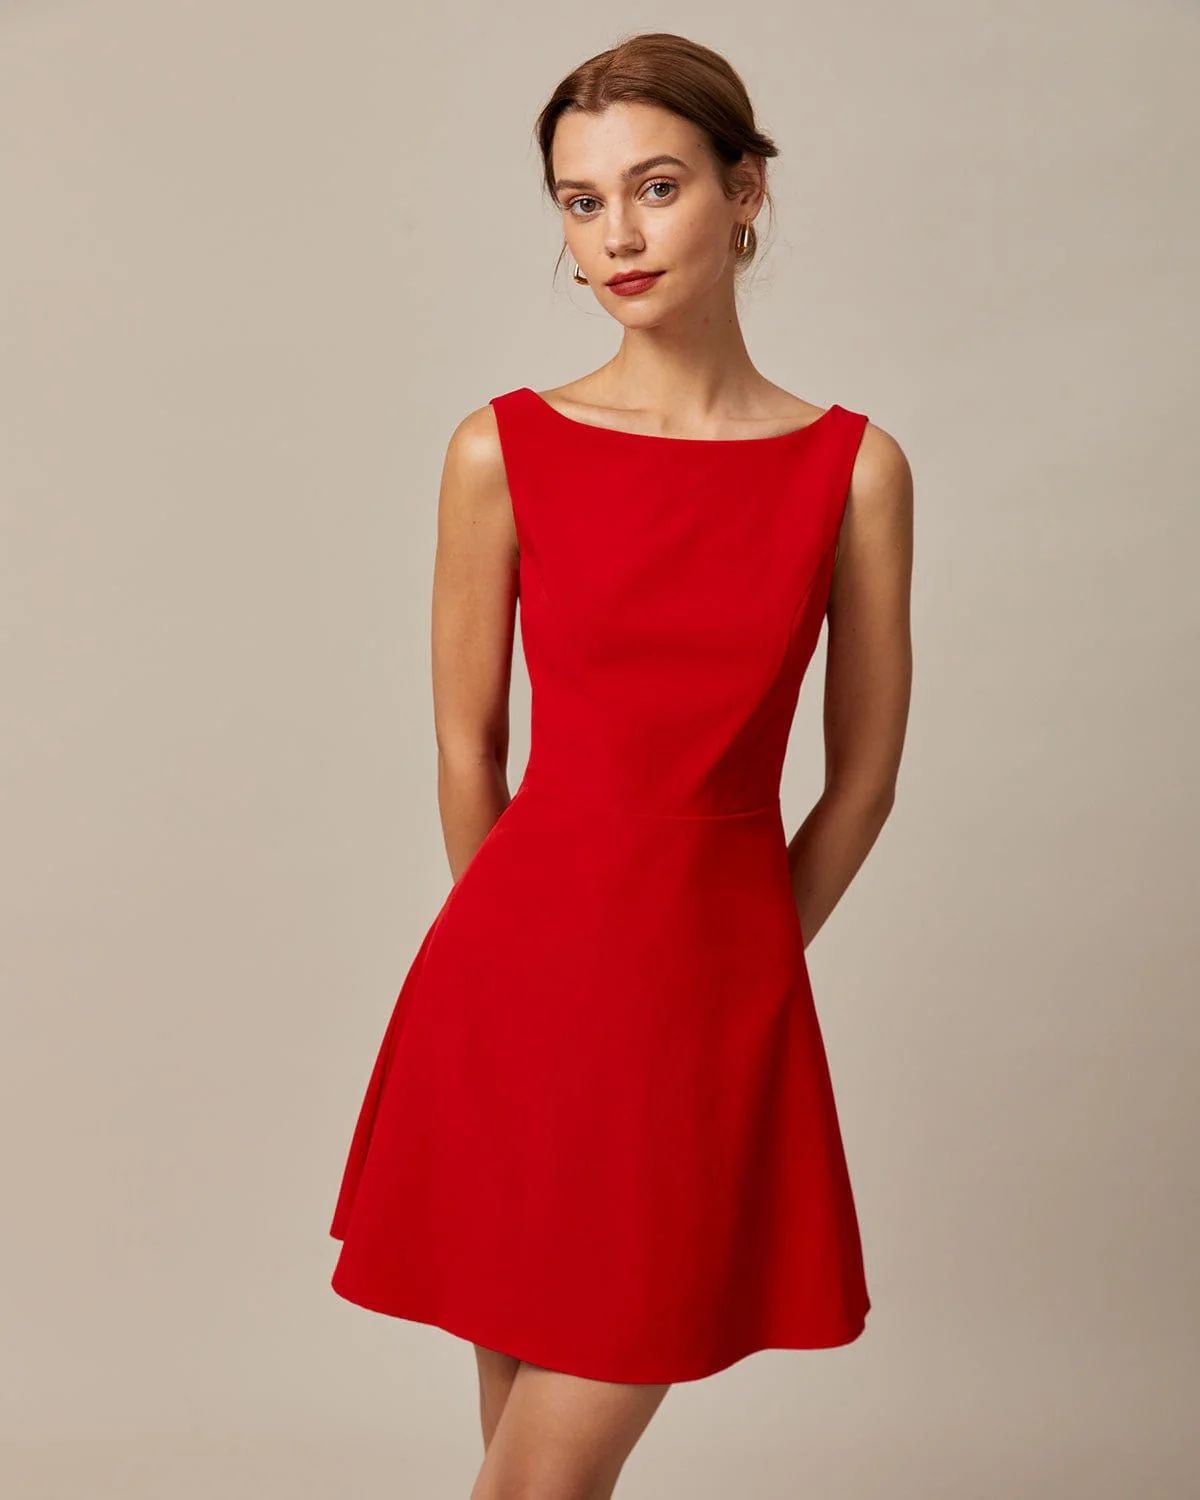 The Red Boat Neck High Waisted Mini Dress - Boat Neck Sleeveless A Line Backless Mini Dress - Red... | rihoas.com